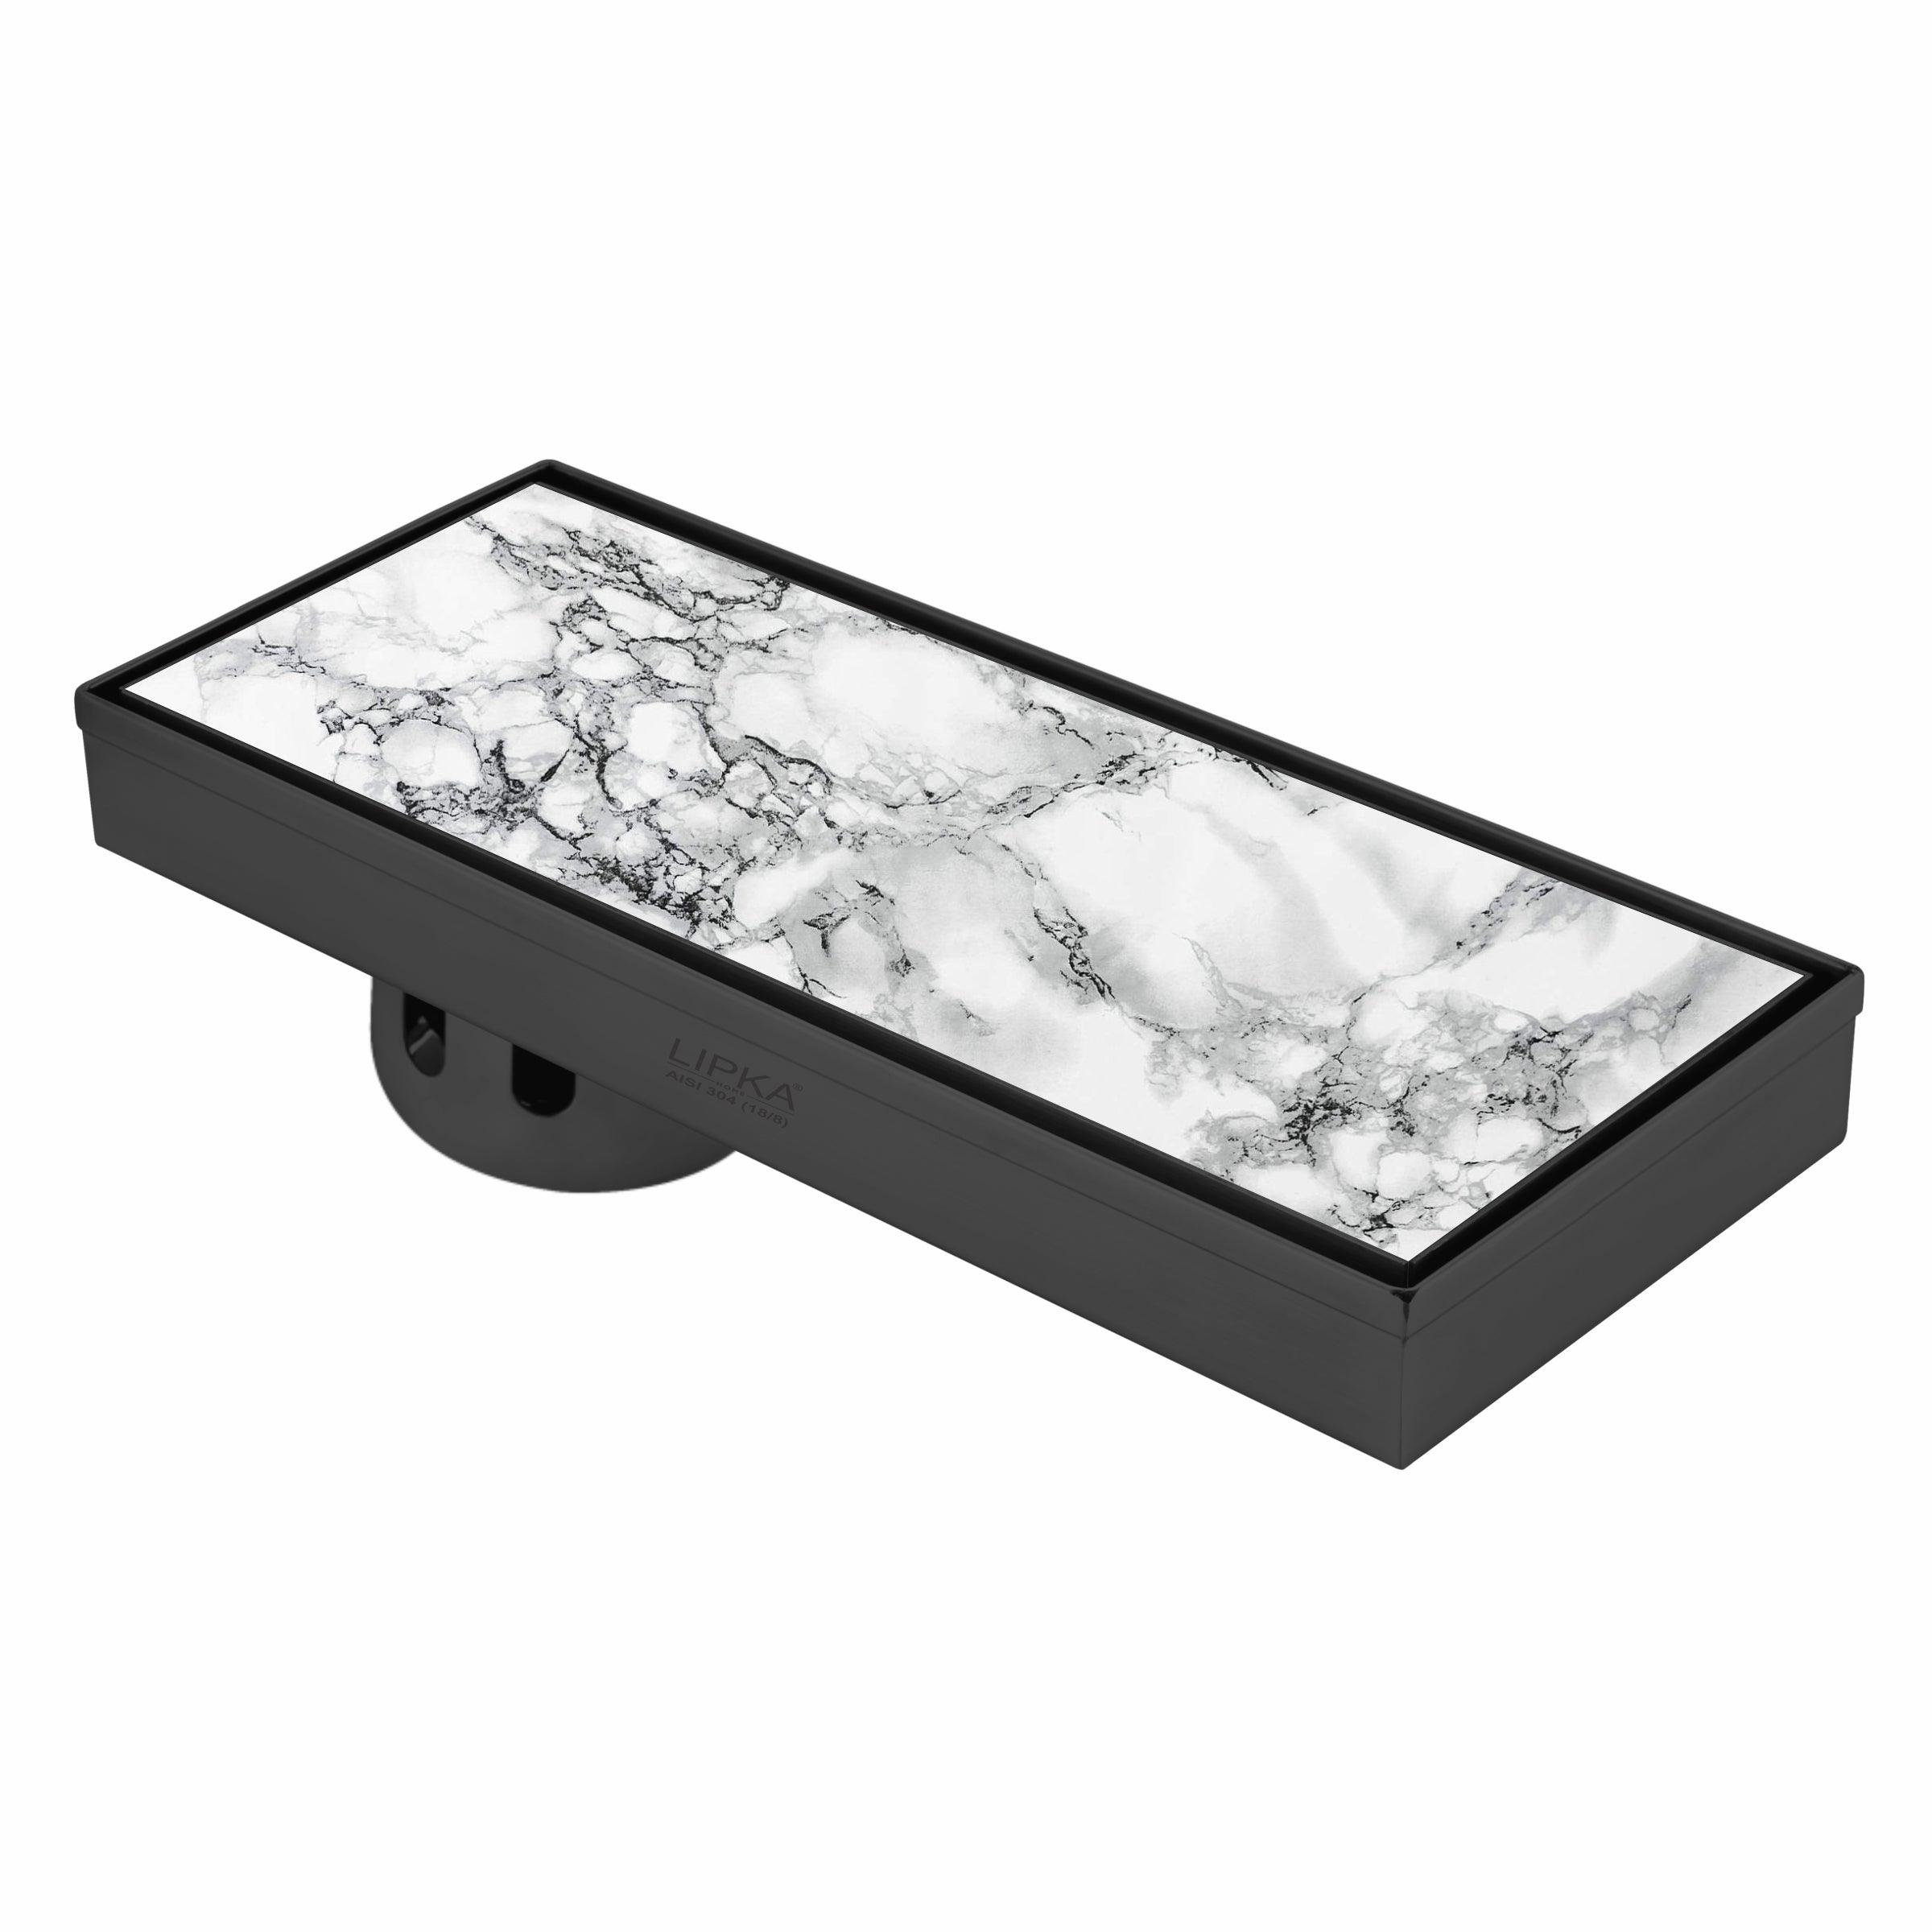 Marble Insert Shower Drain Channel - Black (12 x 5 Inches)